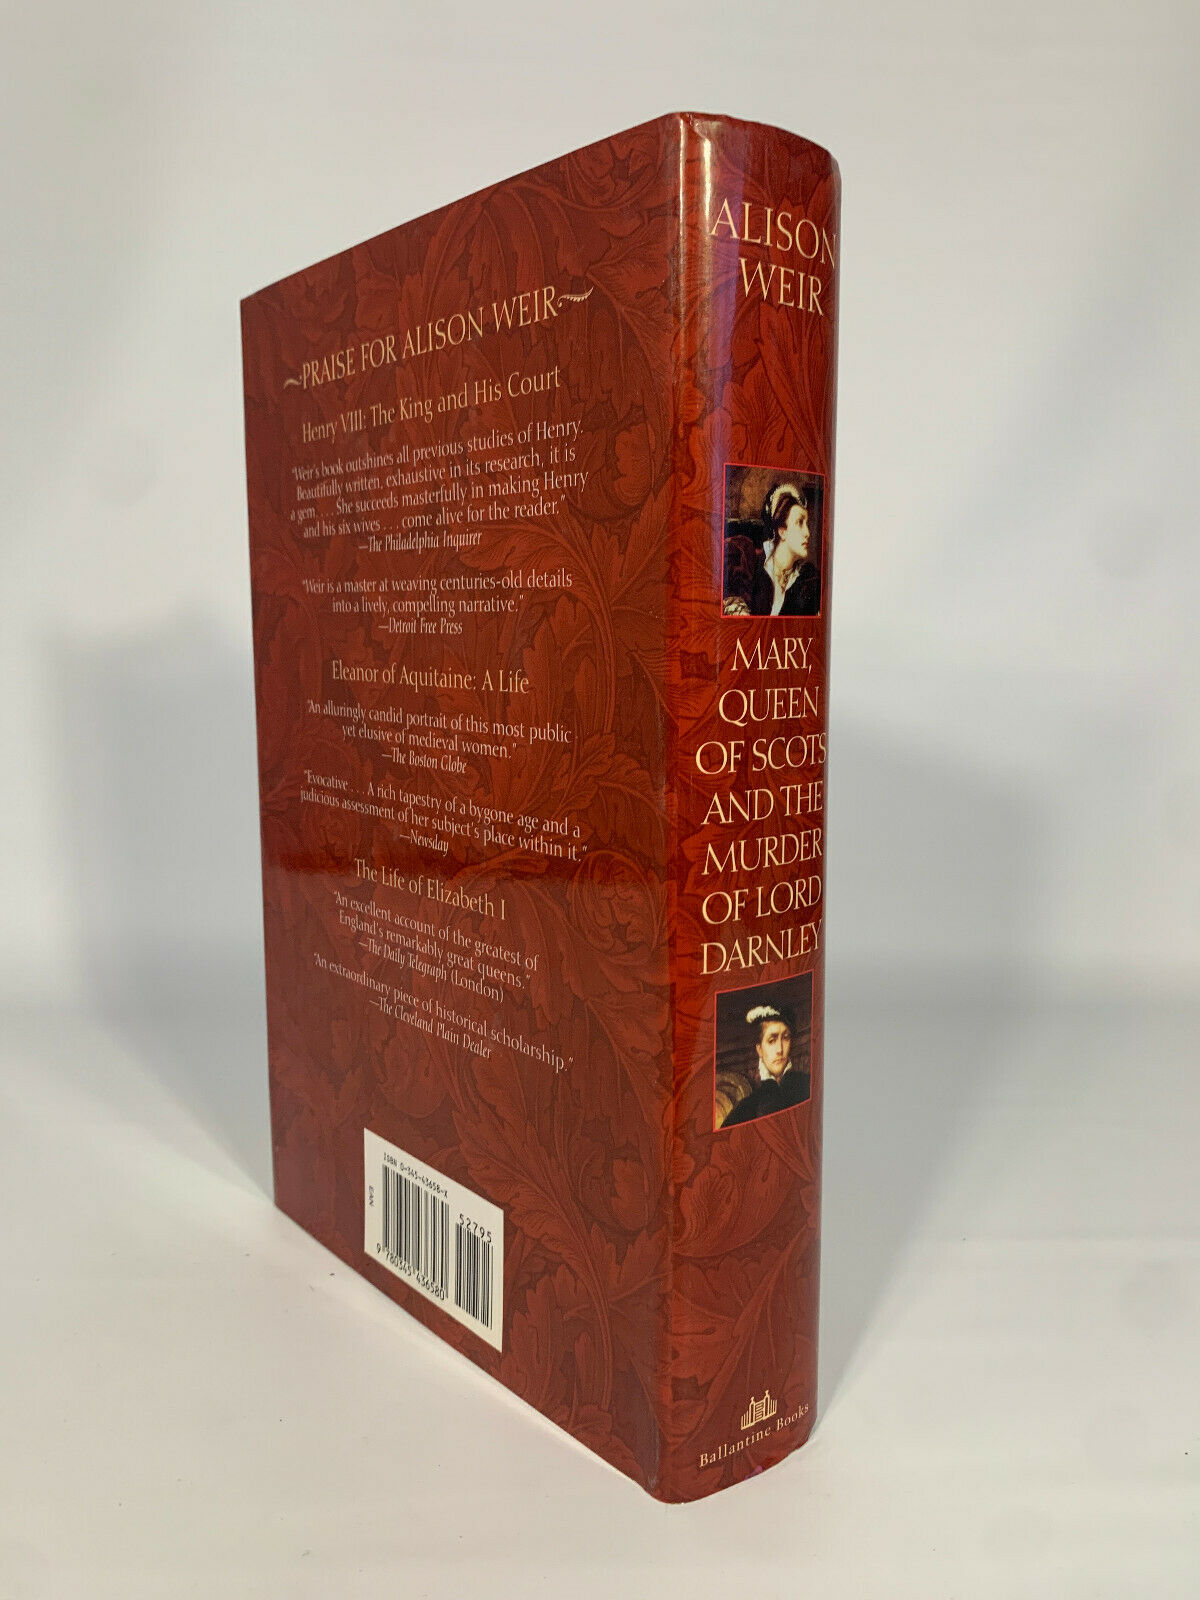 Mary, Queen of Scots and the Murder of Lord Darnley by Alison Weir, Hardcover